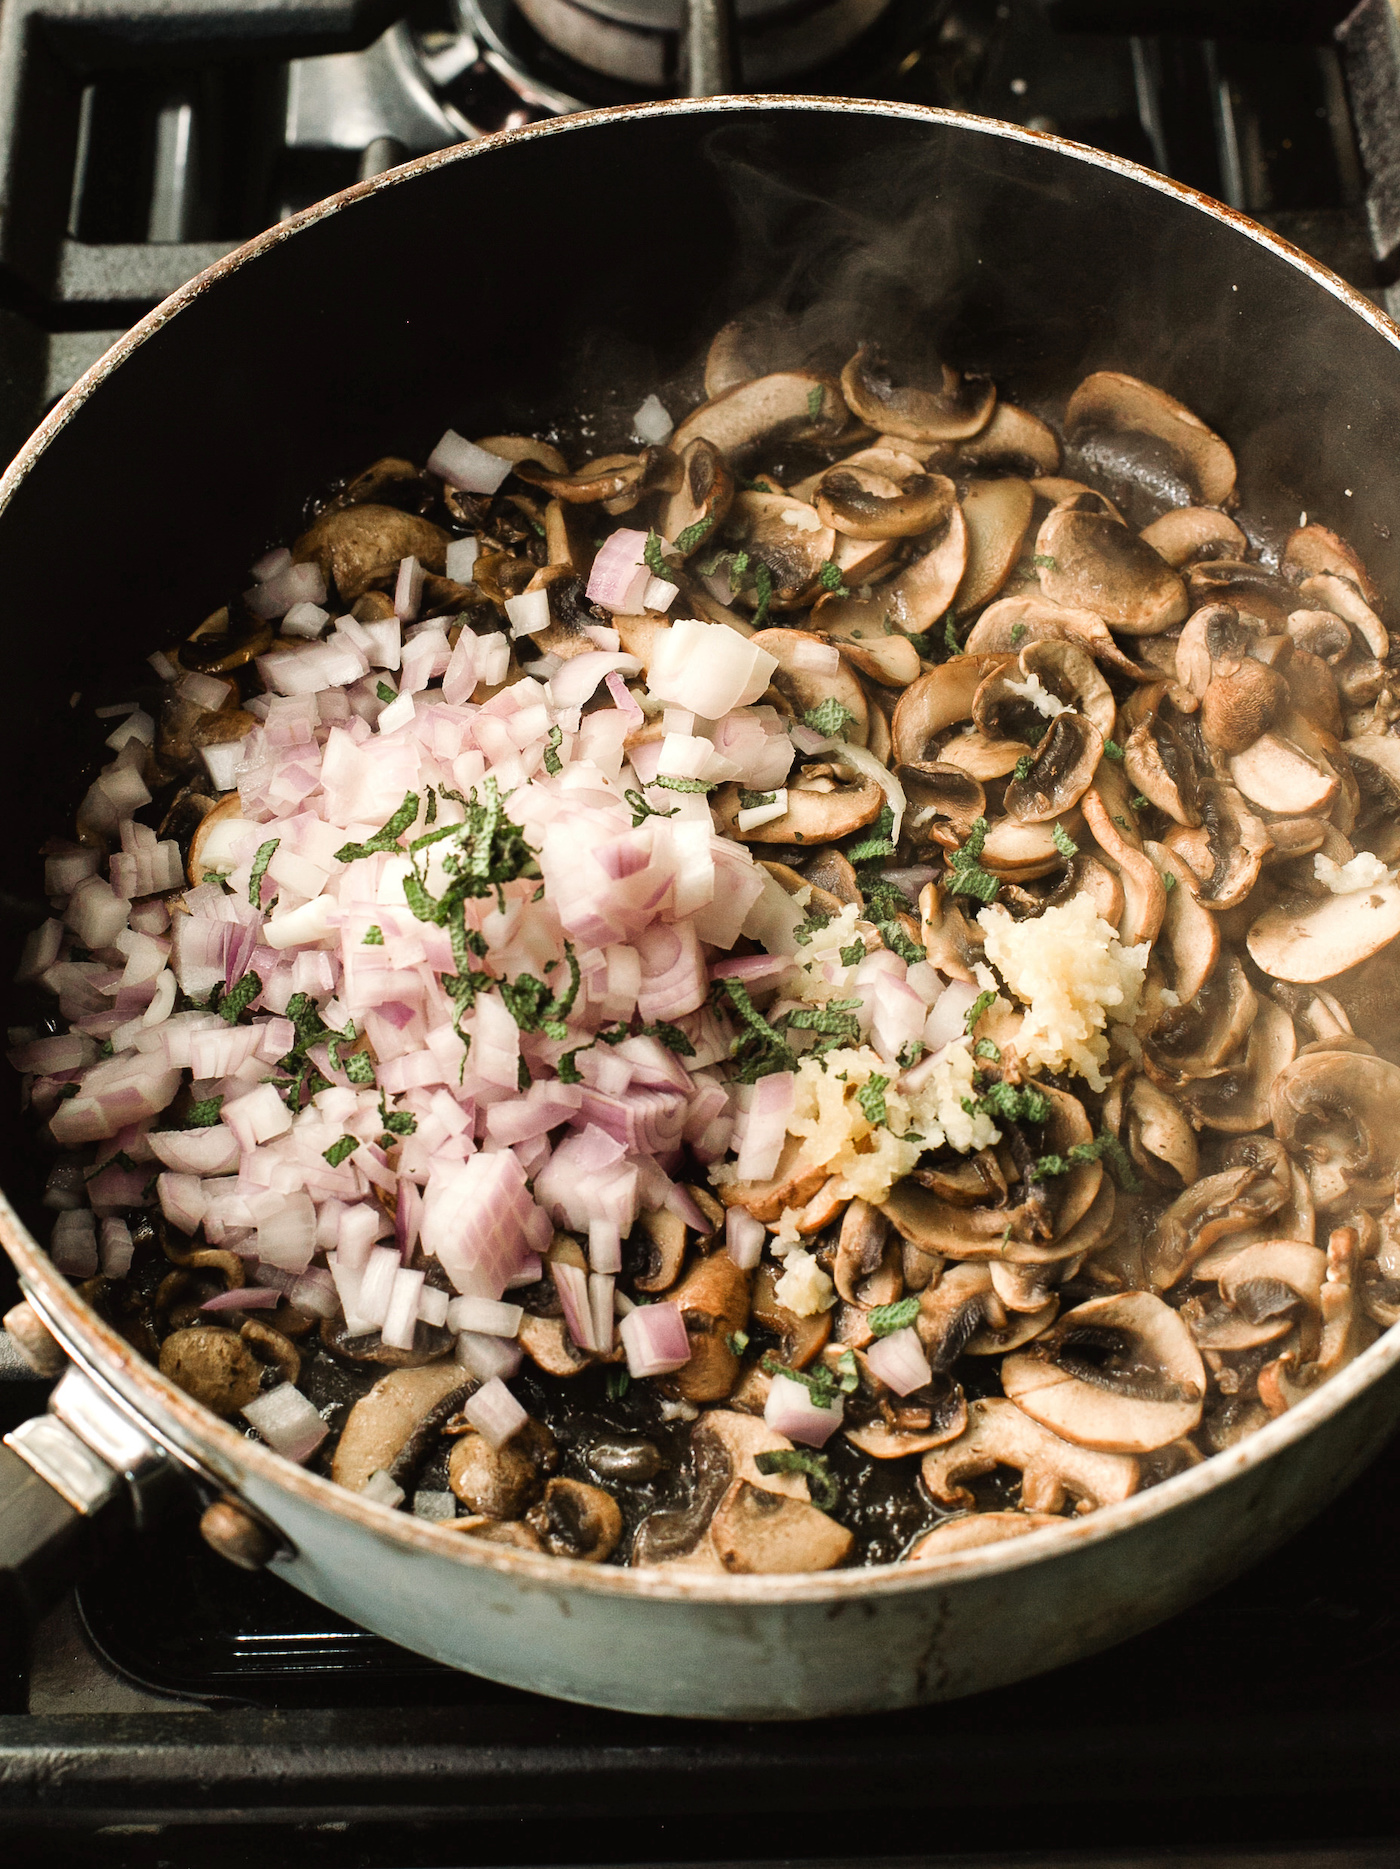 Shallots, garlic, and sage added to the mushrooms